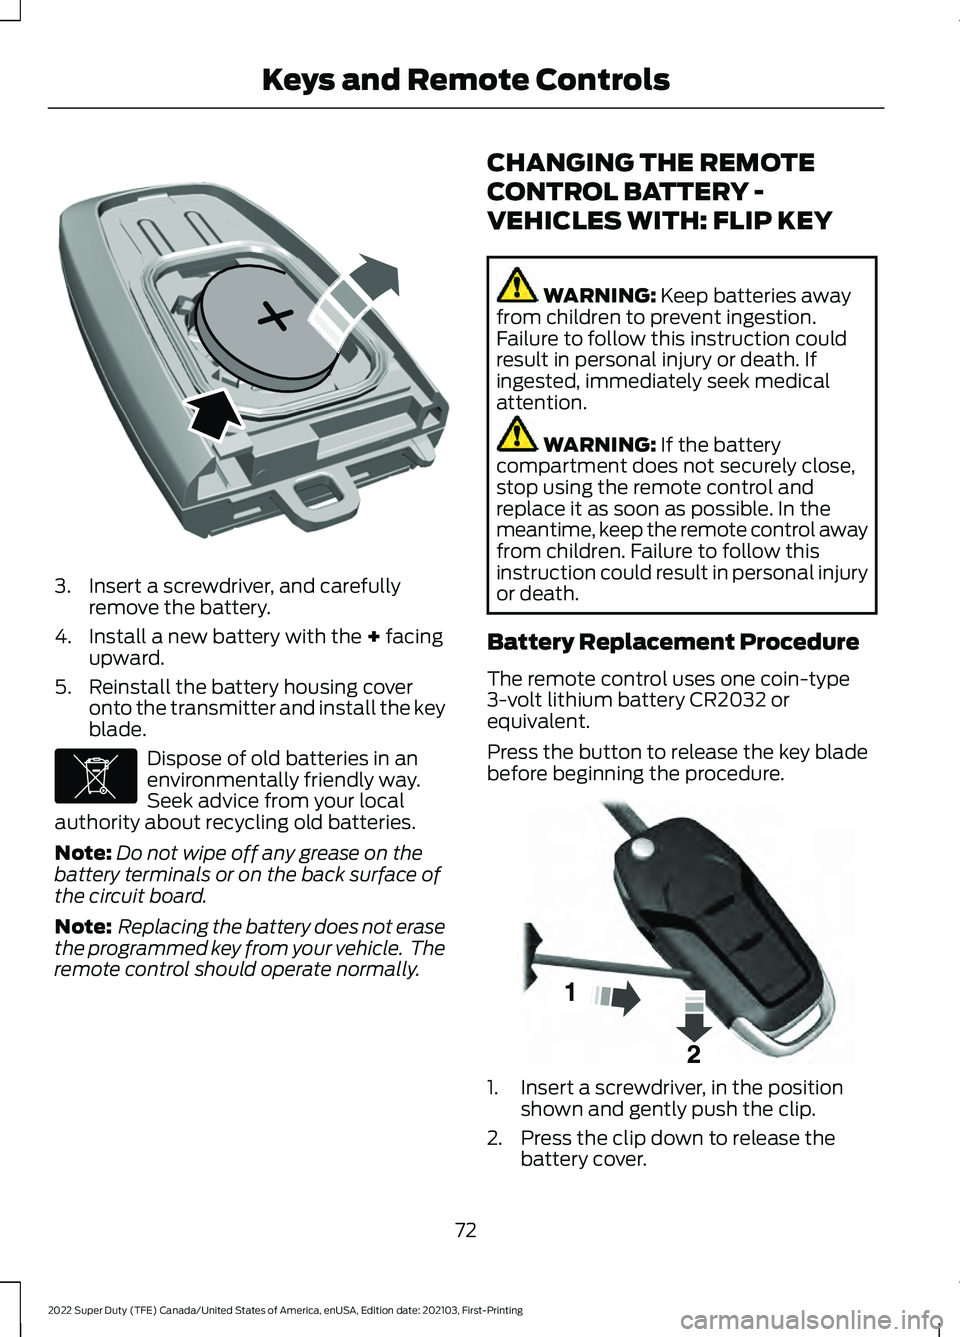 FORD F-450 2022  Owners Manual 3. Insert a screwdriver, and carefully
remove the battery.
4. Install a new battery with the + facing
upward.
5. Reinstall the battery housing cover onto the transmitter and install the key
blade. Dis